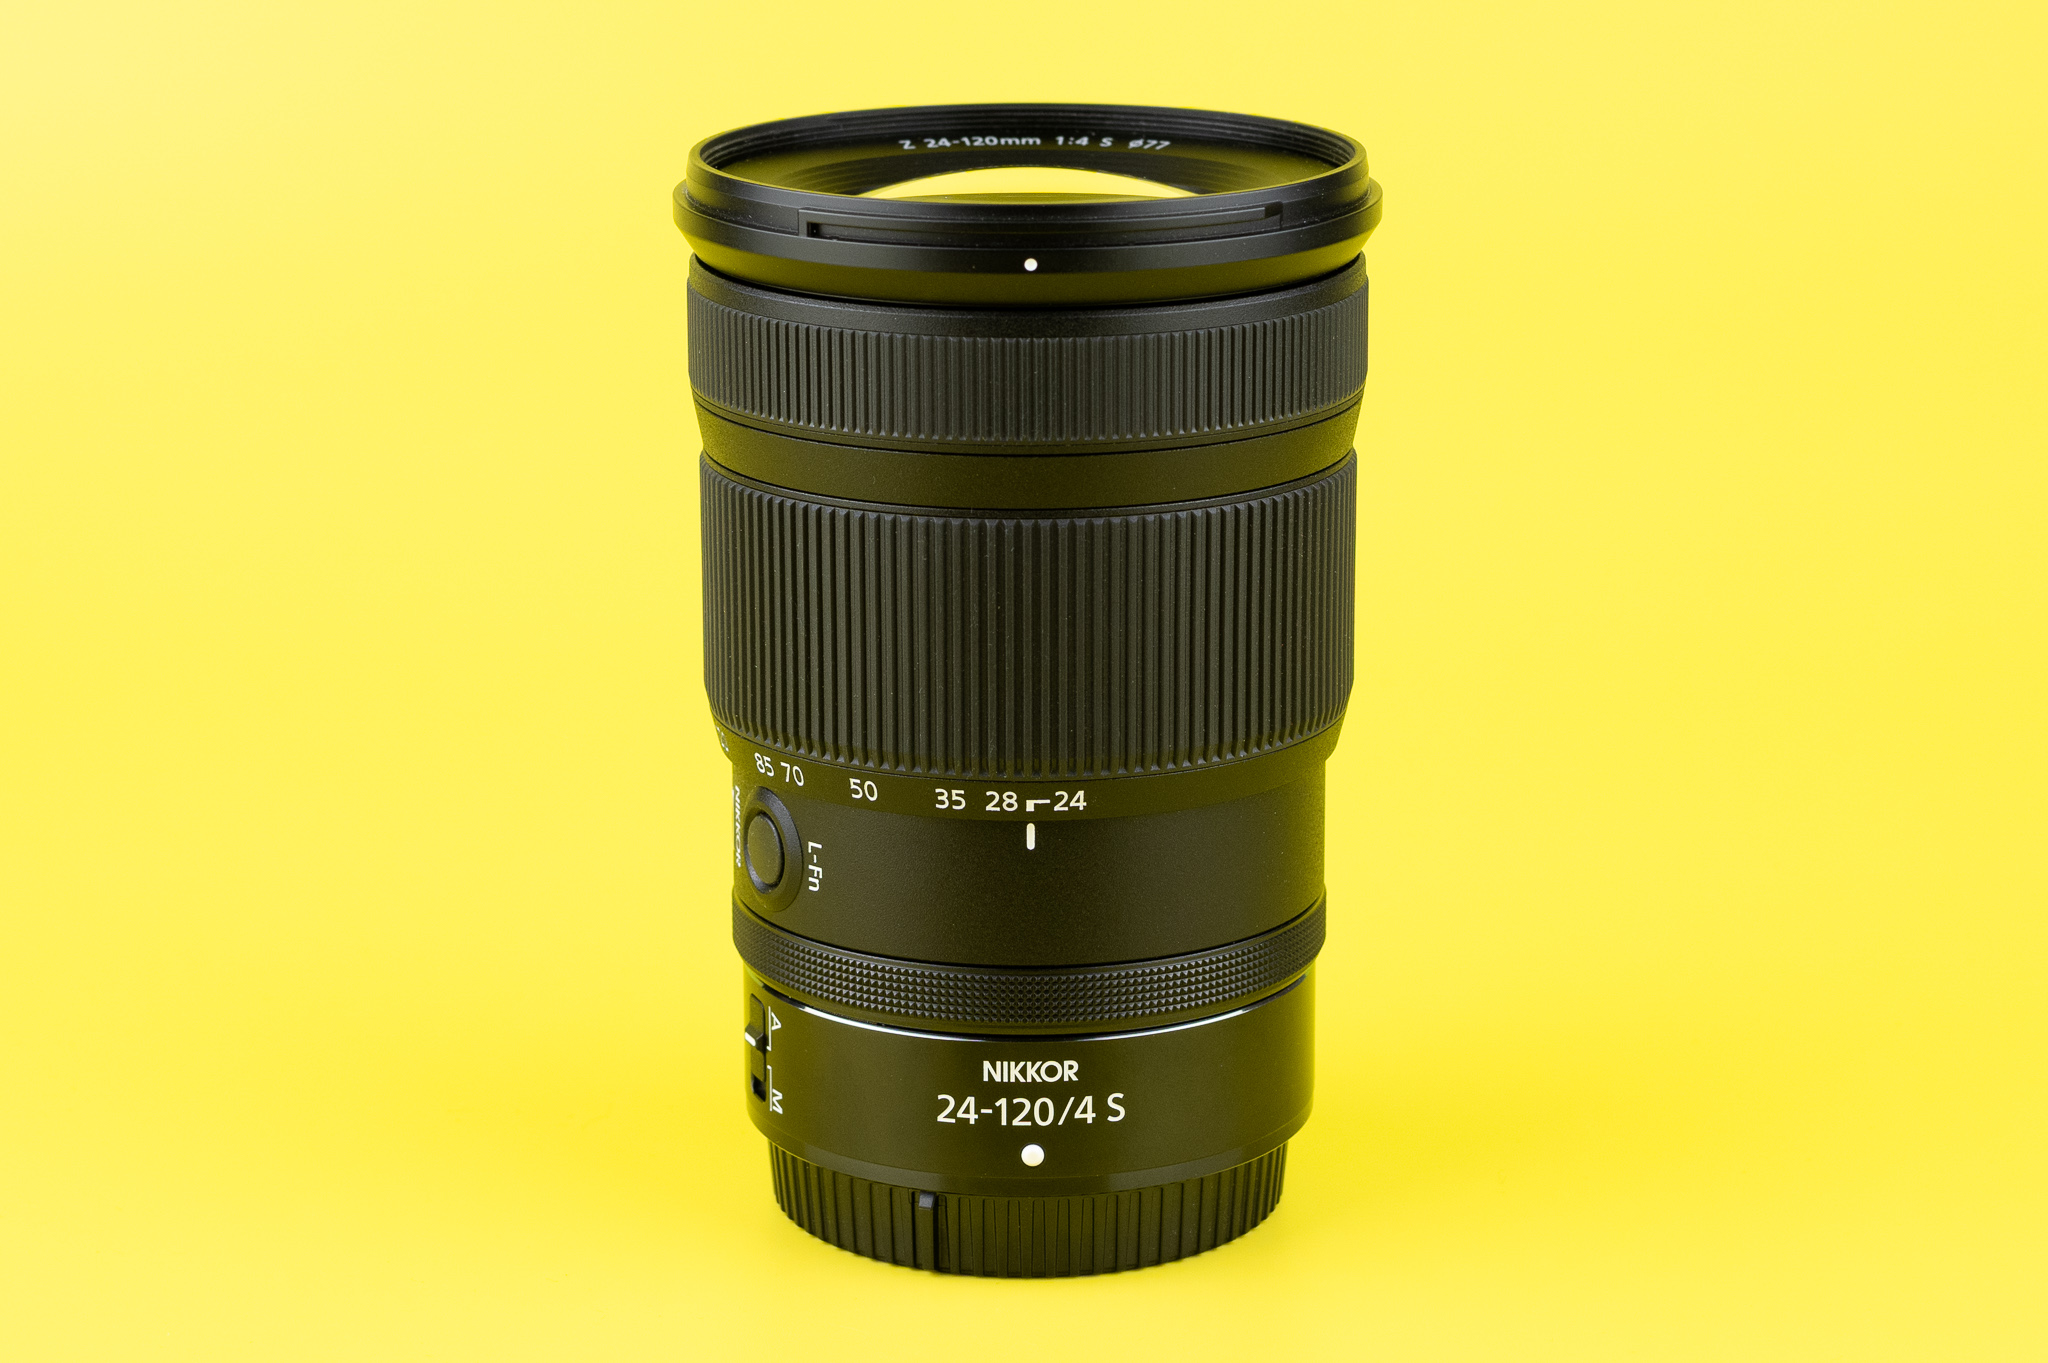 Nikon Z 24-120mm f/4 S Review - Optical Features